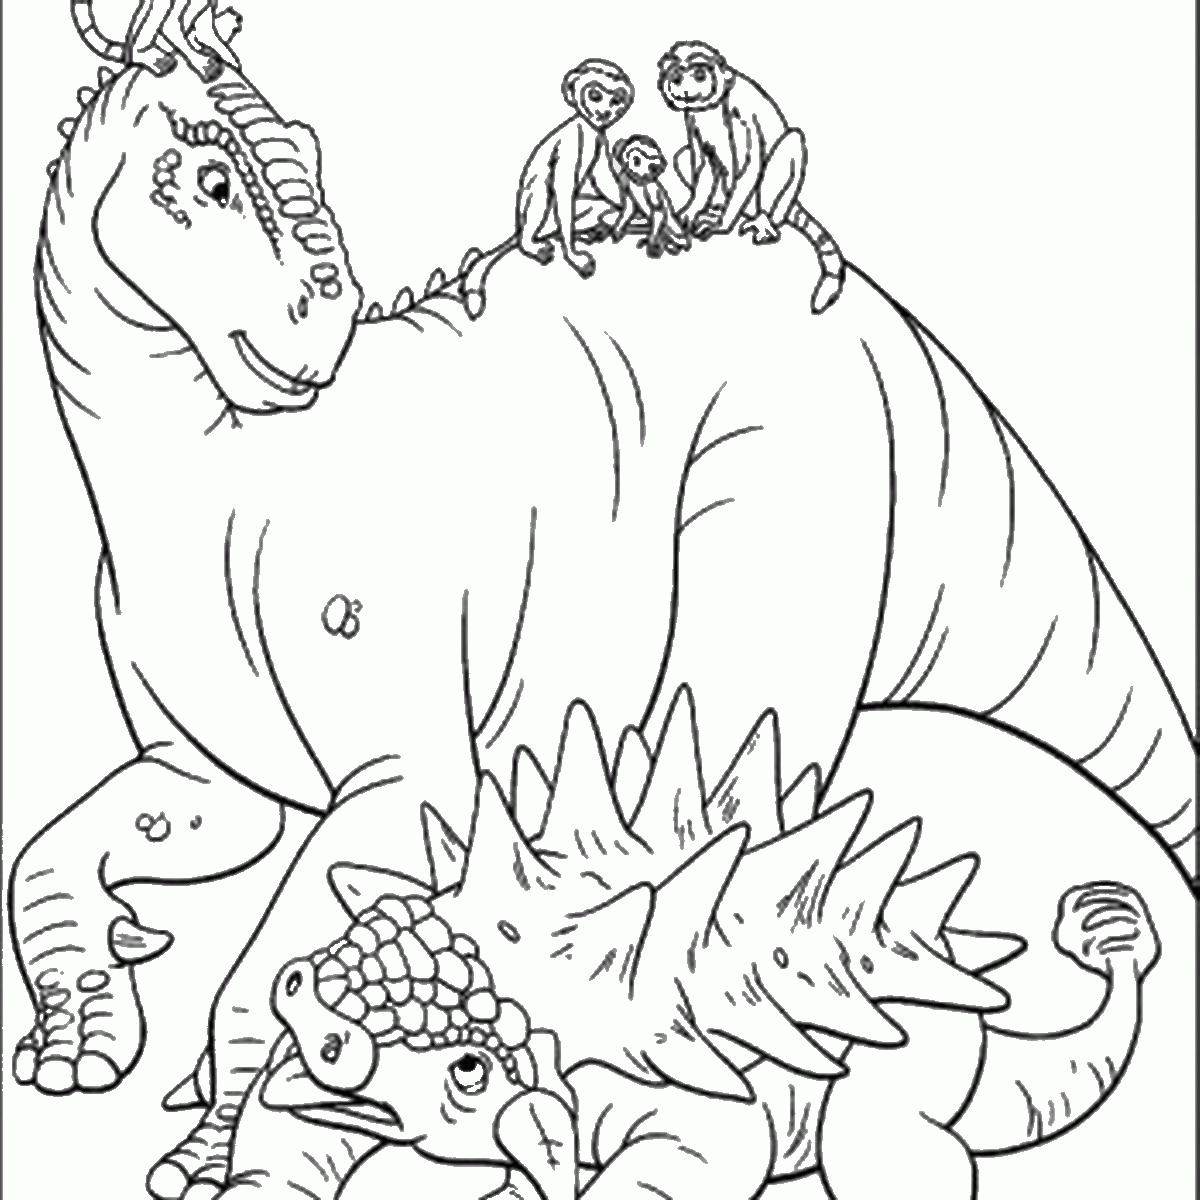 9 Pics of Jurassic Park Spinosaurus Coloring Pages - World ...